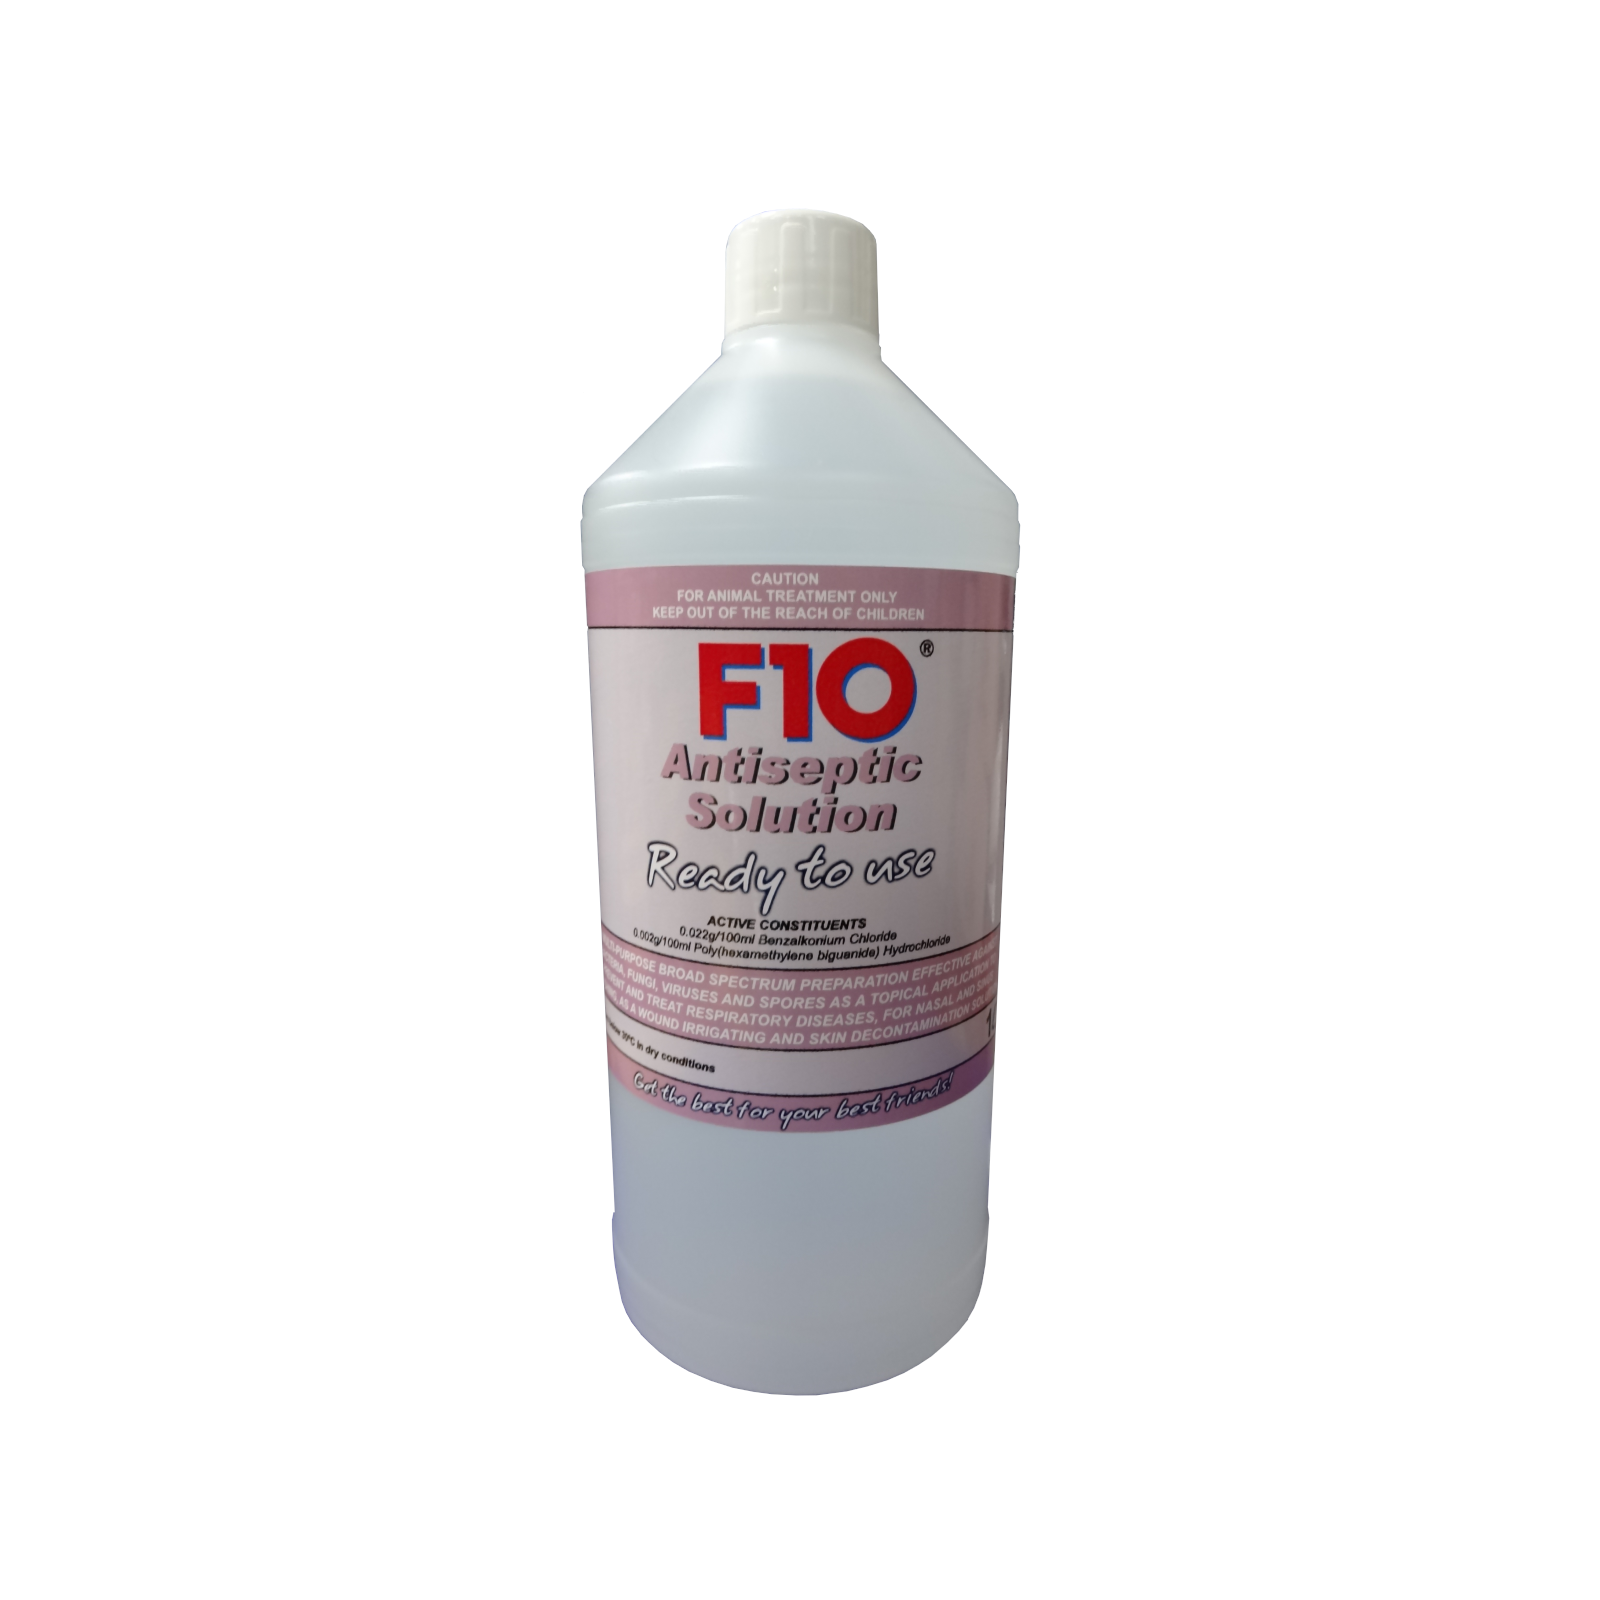 A 1 litre bottle of F10 Antiseptic Solution Concentrate Ready to Use